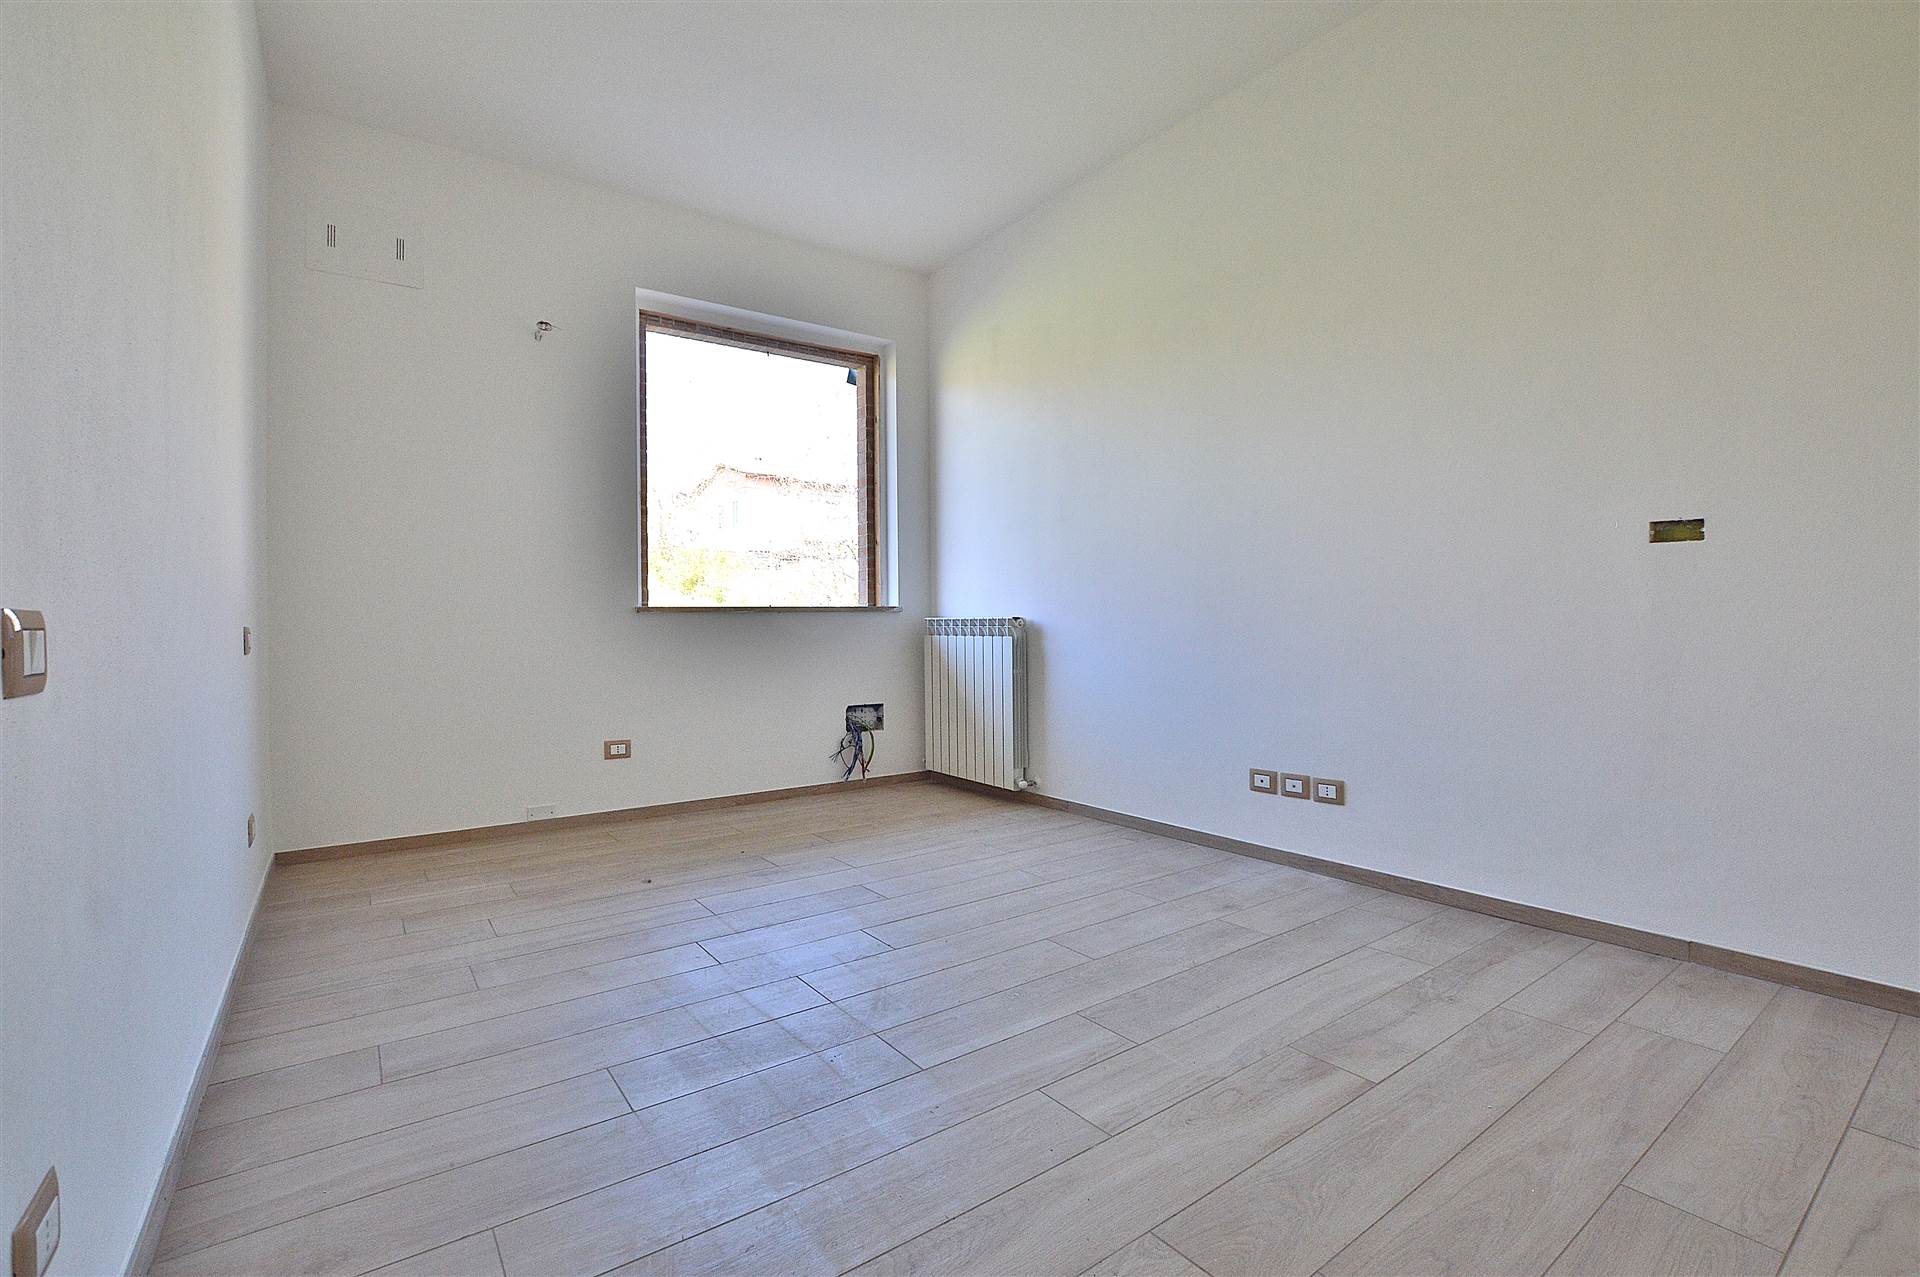 DUE PONTI, SIENA, Apartment for sale of 120 Sq. mt., Restored, Heating Individual heating system, Energetic class: C, Epi: 50 kwh/m2 year, placed at 